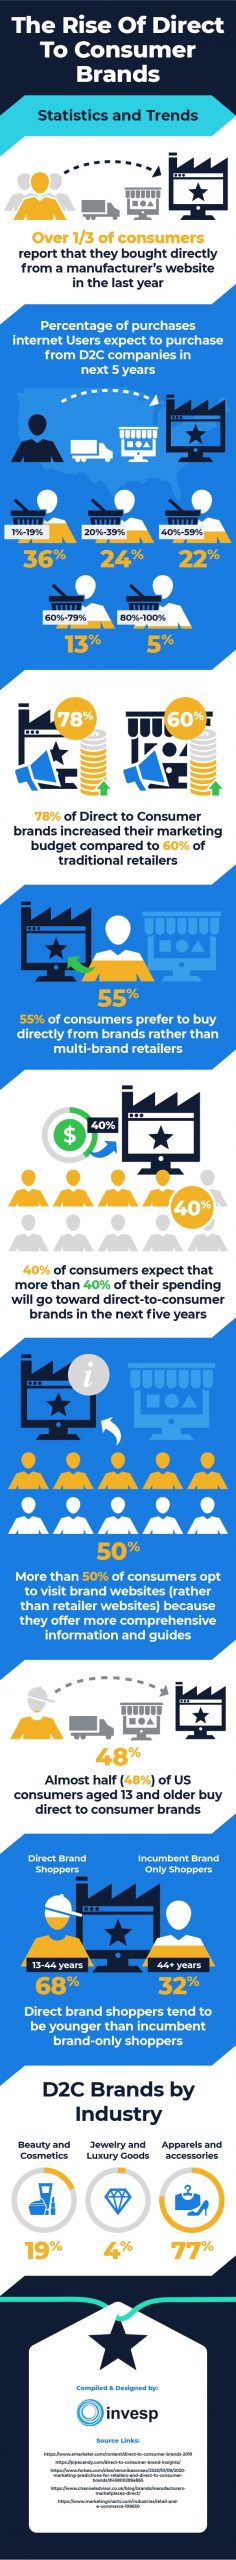 Are Direct-to-Consumer Brands Becoming Popular? [Infographic]